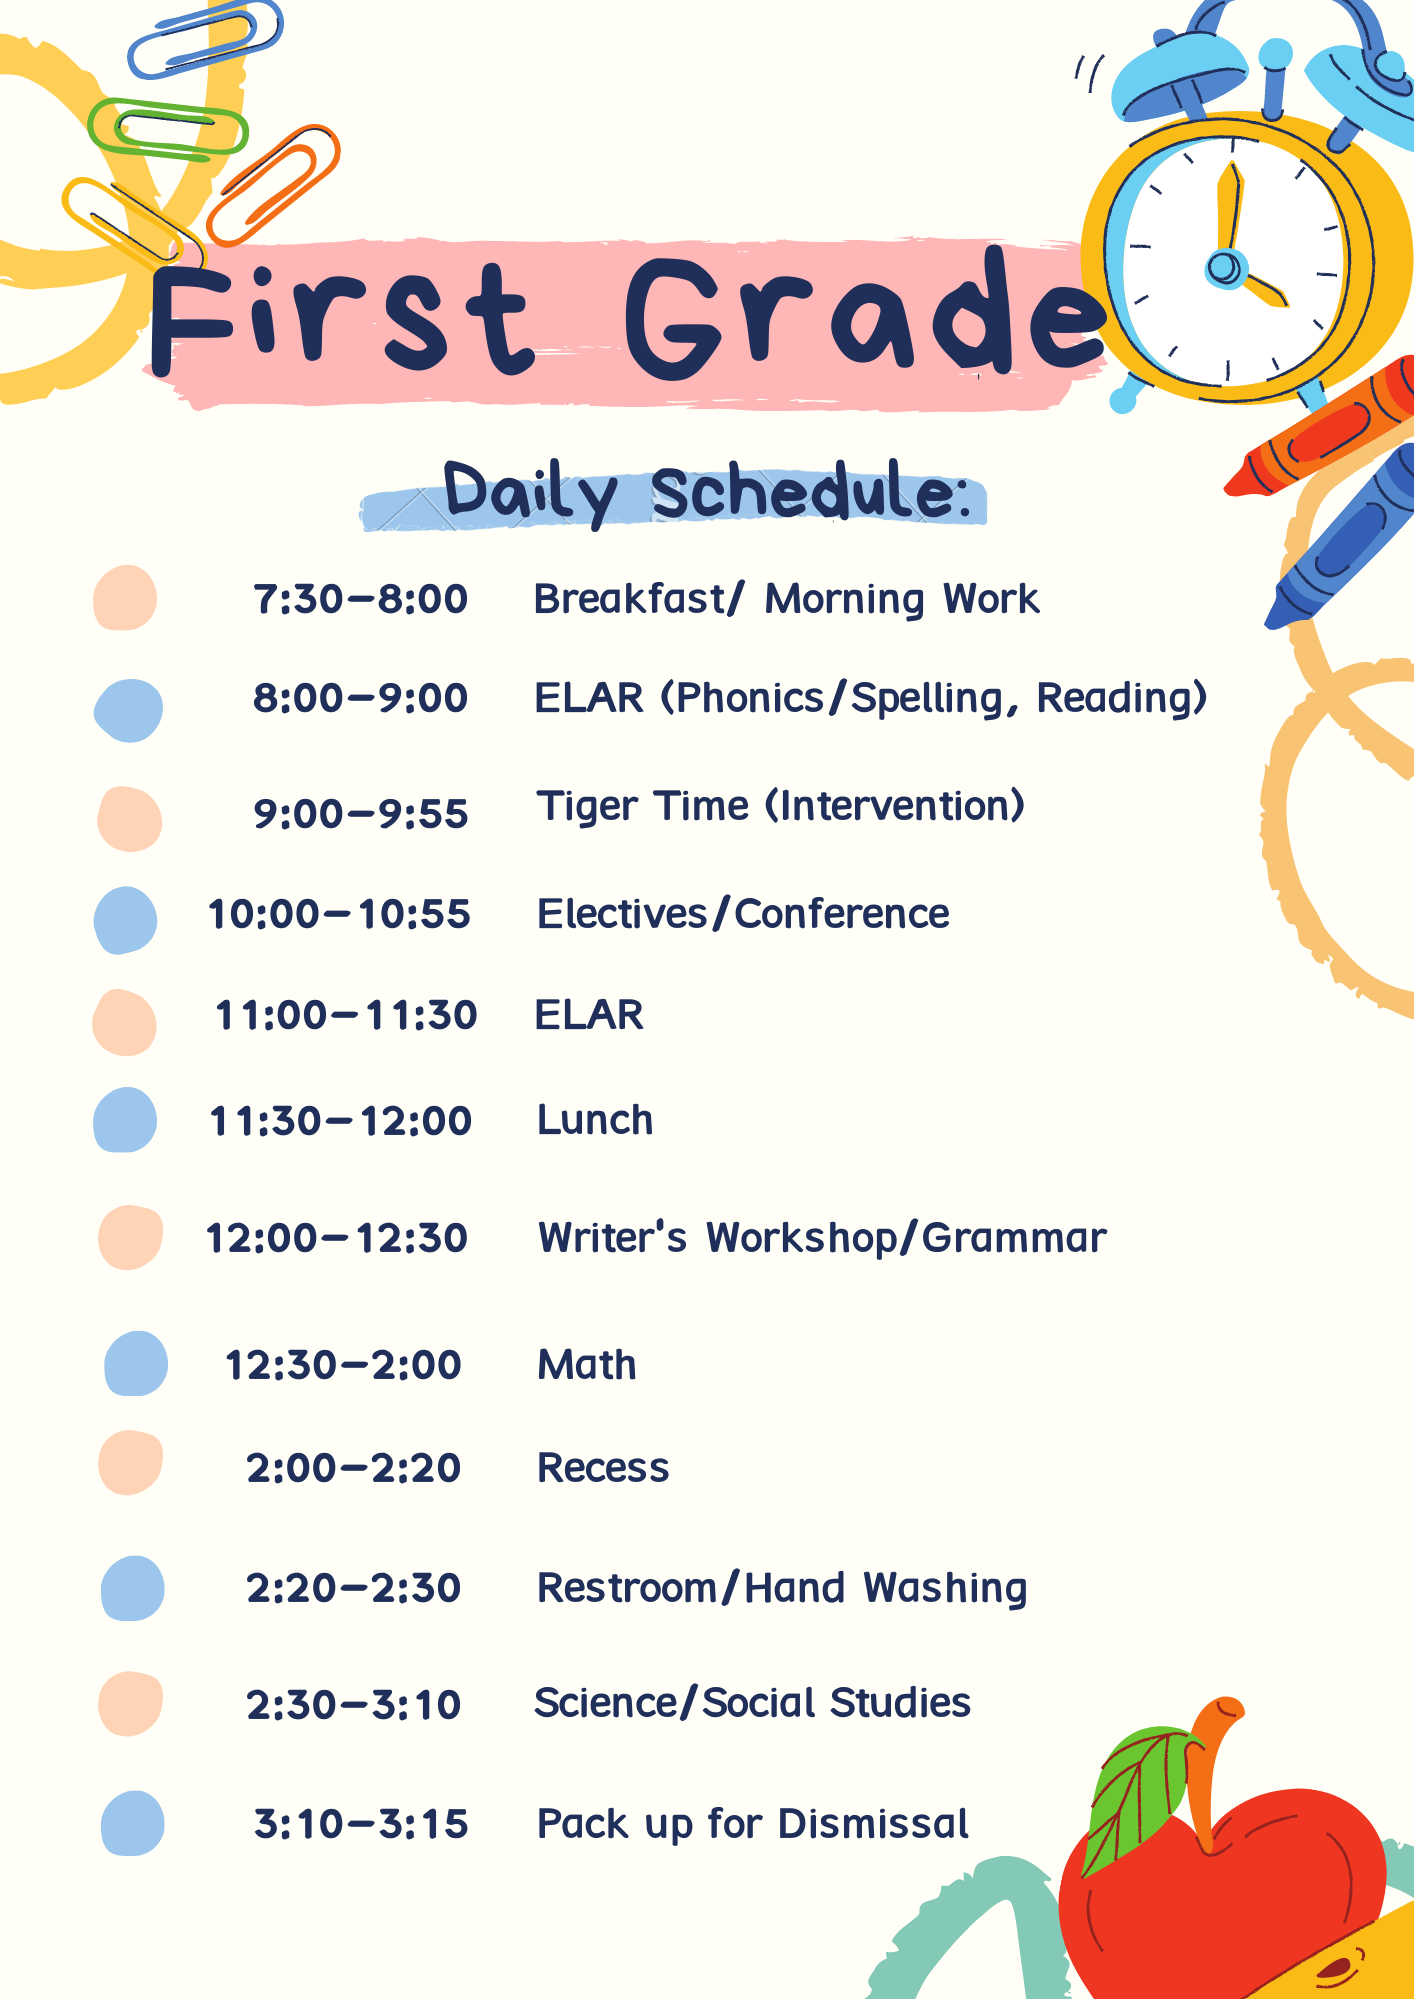 First Grade Daily Schedule.png